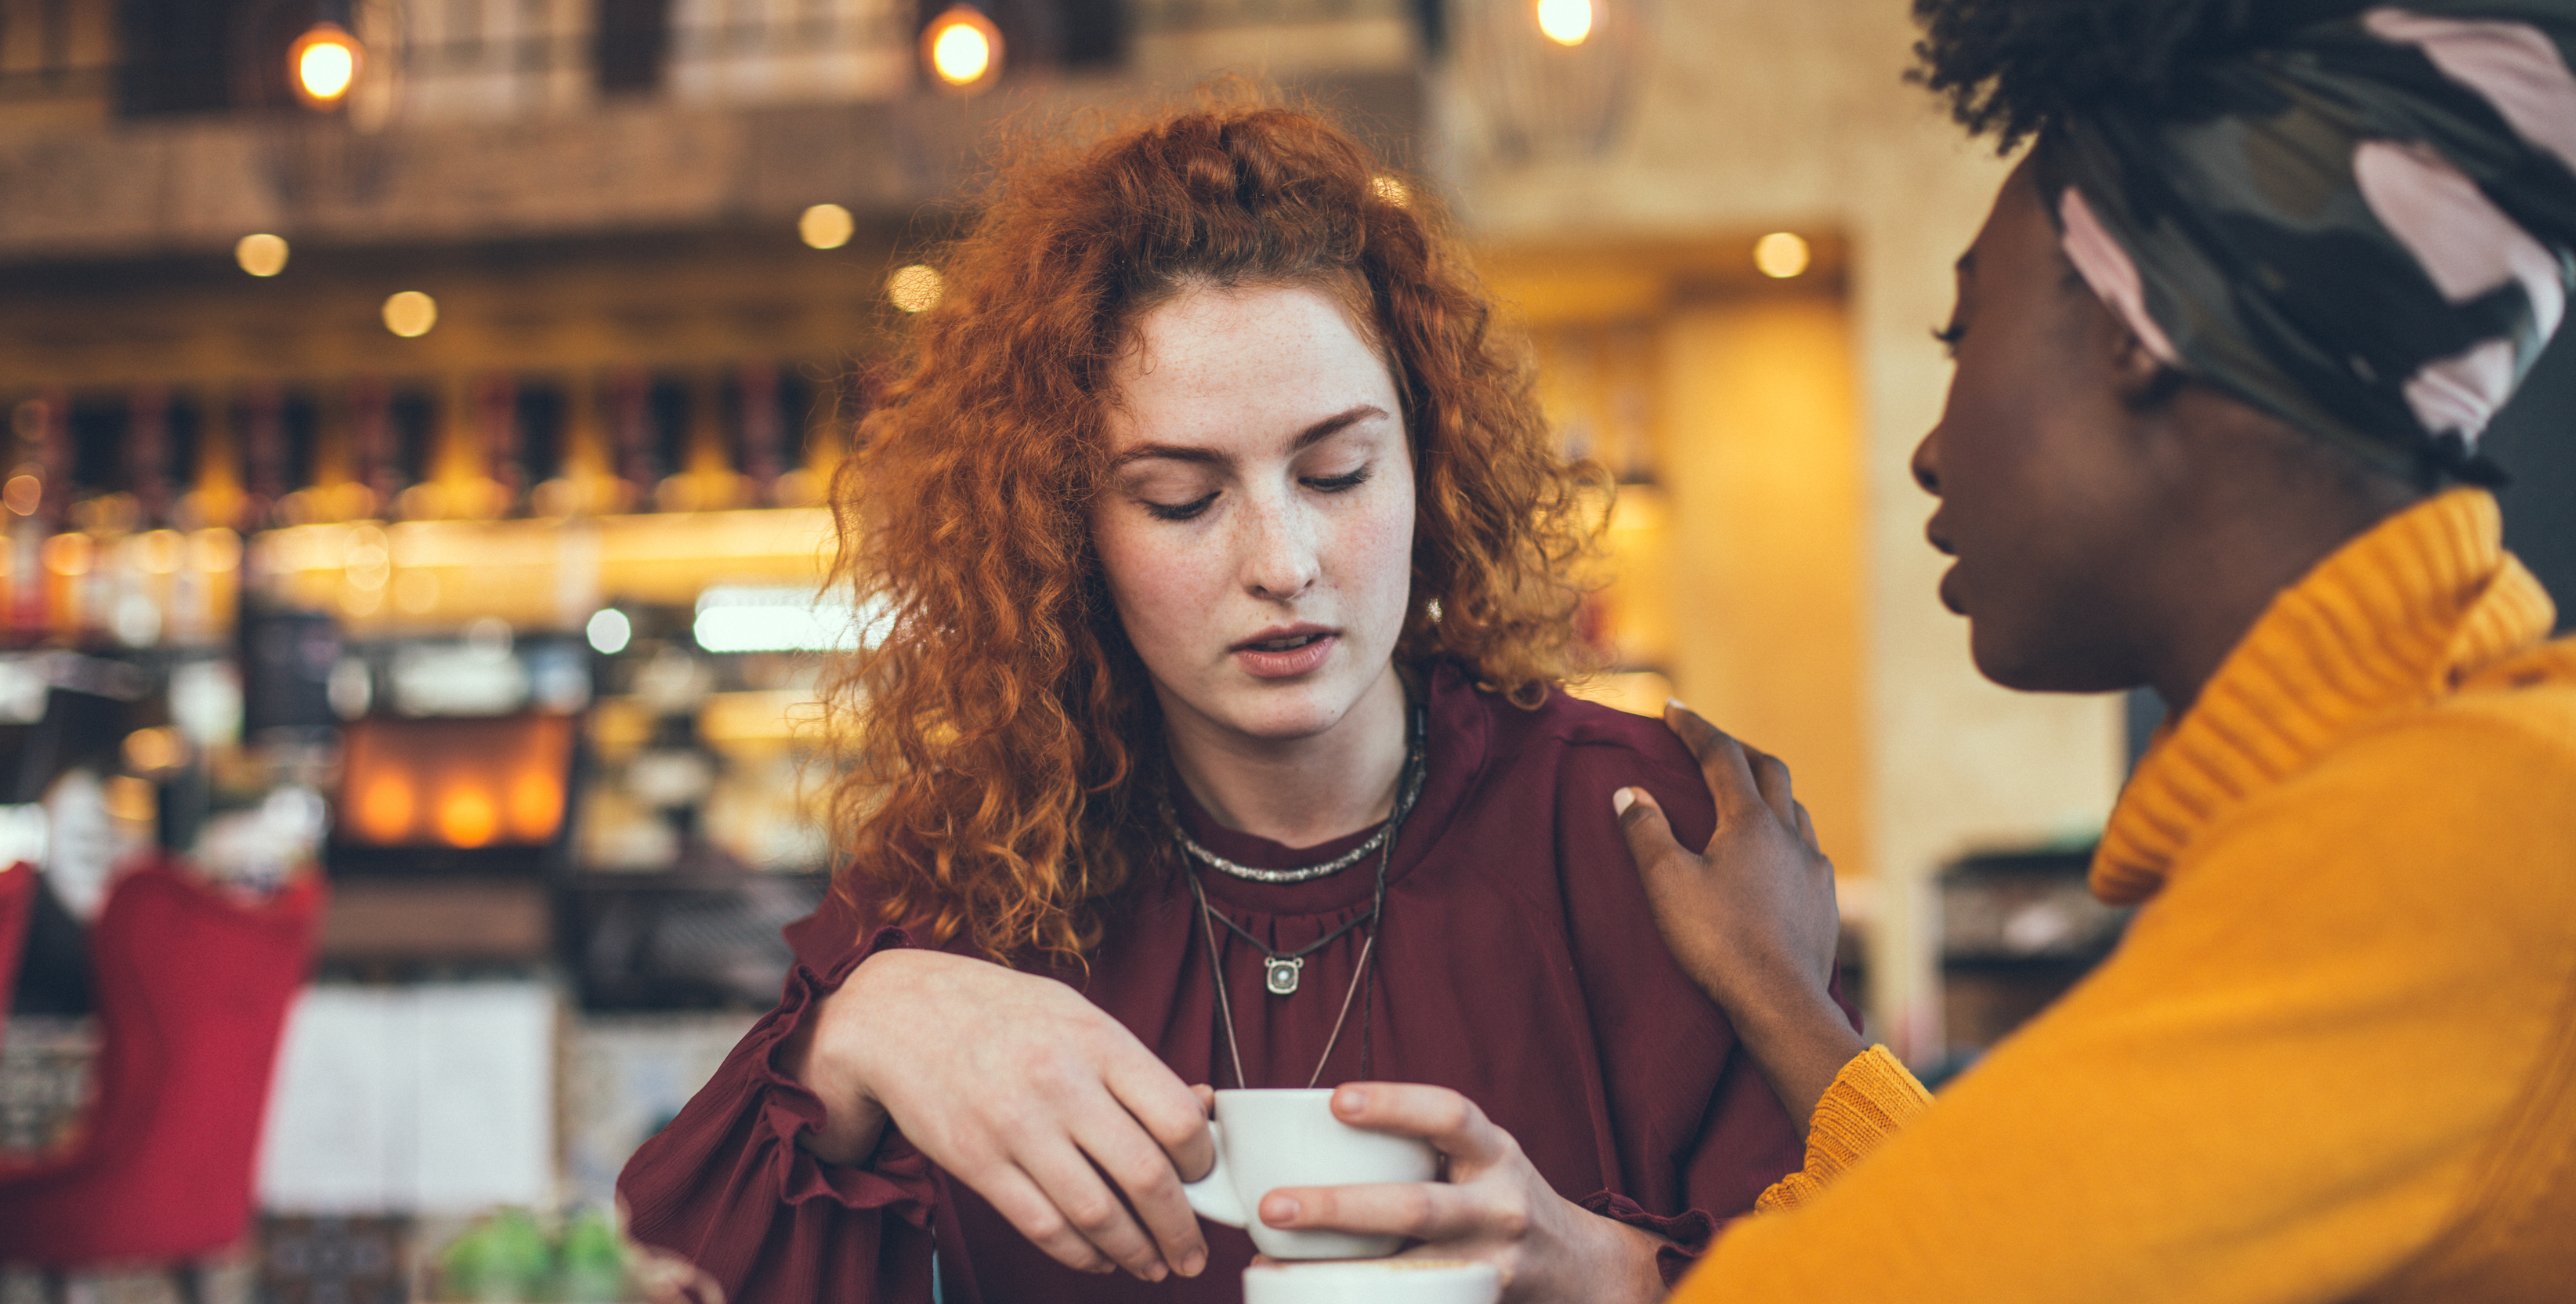 A young women talking to a friend and showing empathy in a cafe